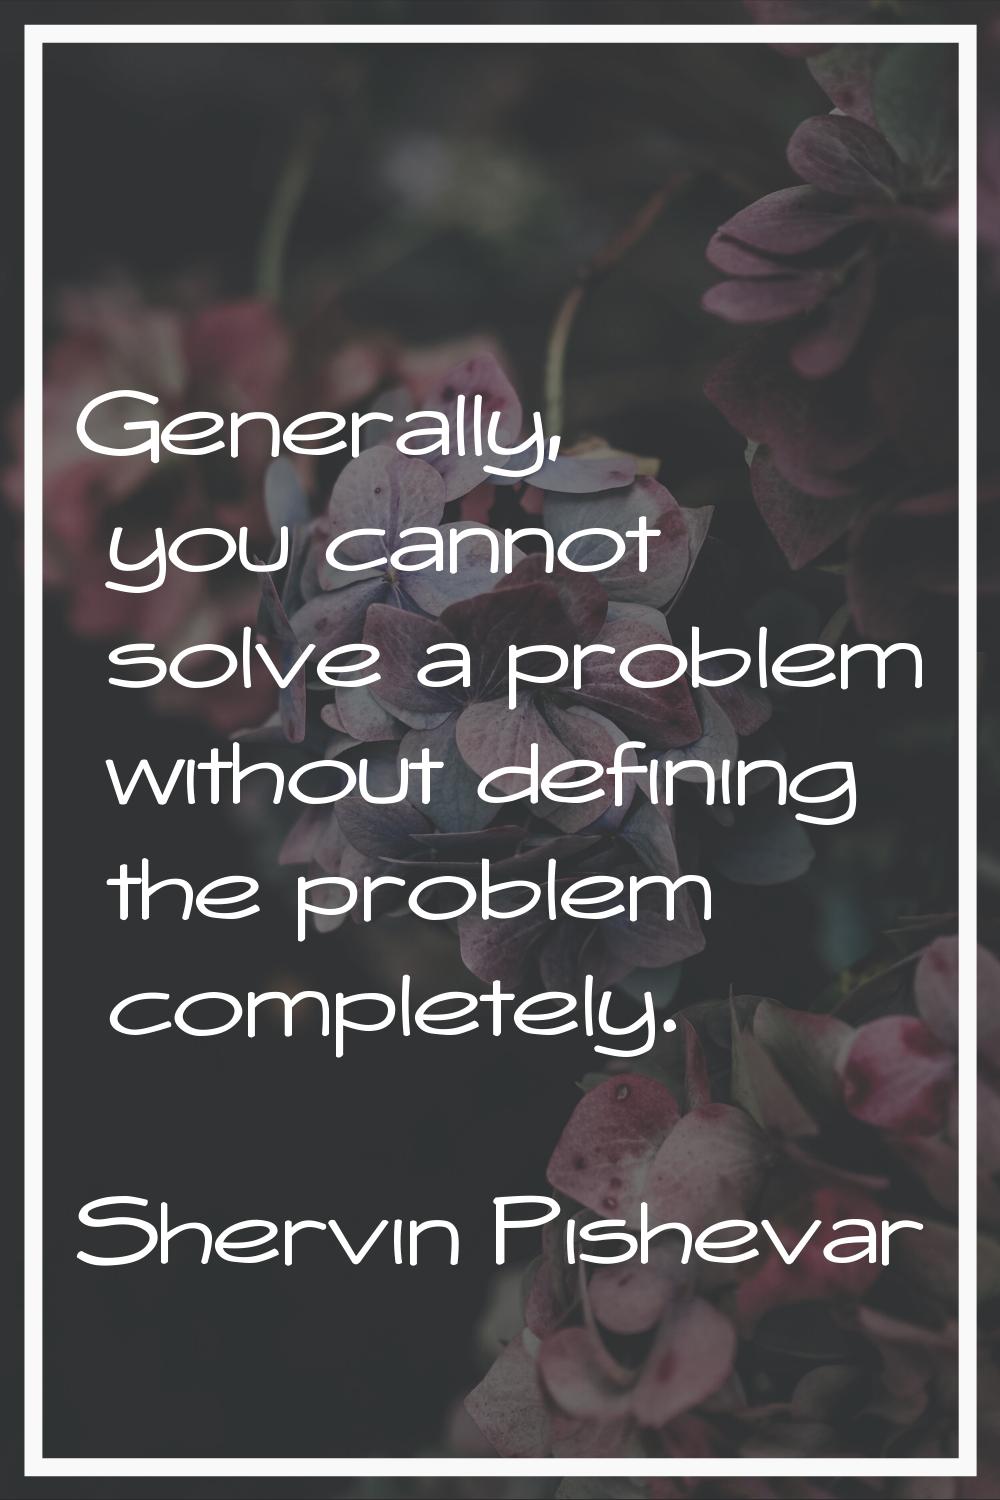 Generally, you cannot solve a problem without defining the problem completely.